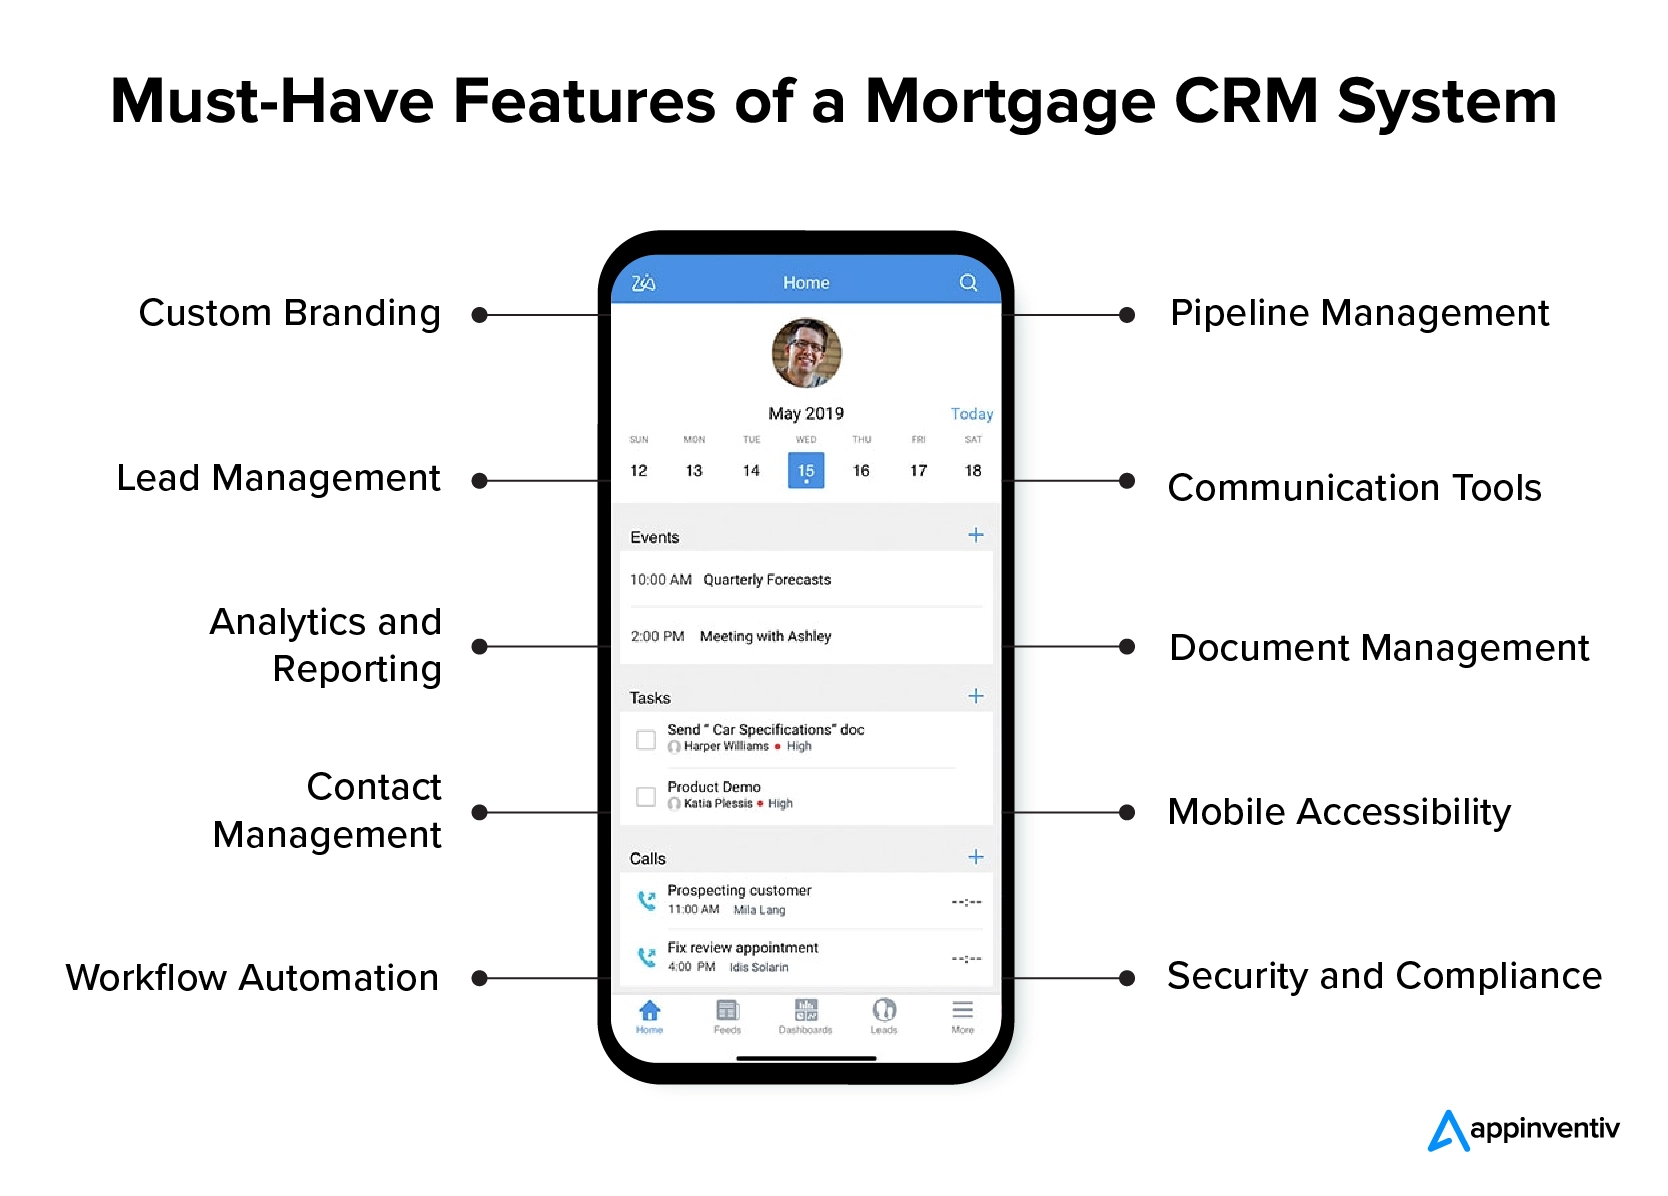 Must-Have Features of a Mortgage CRM System